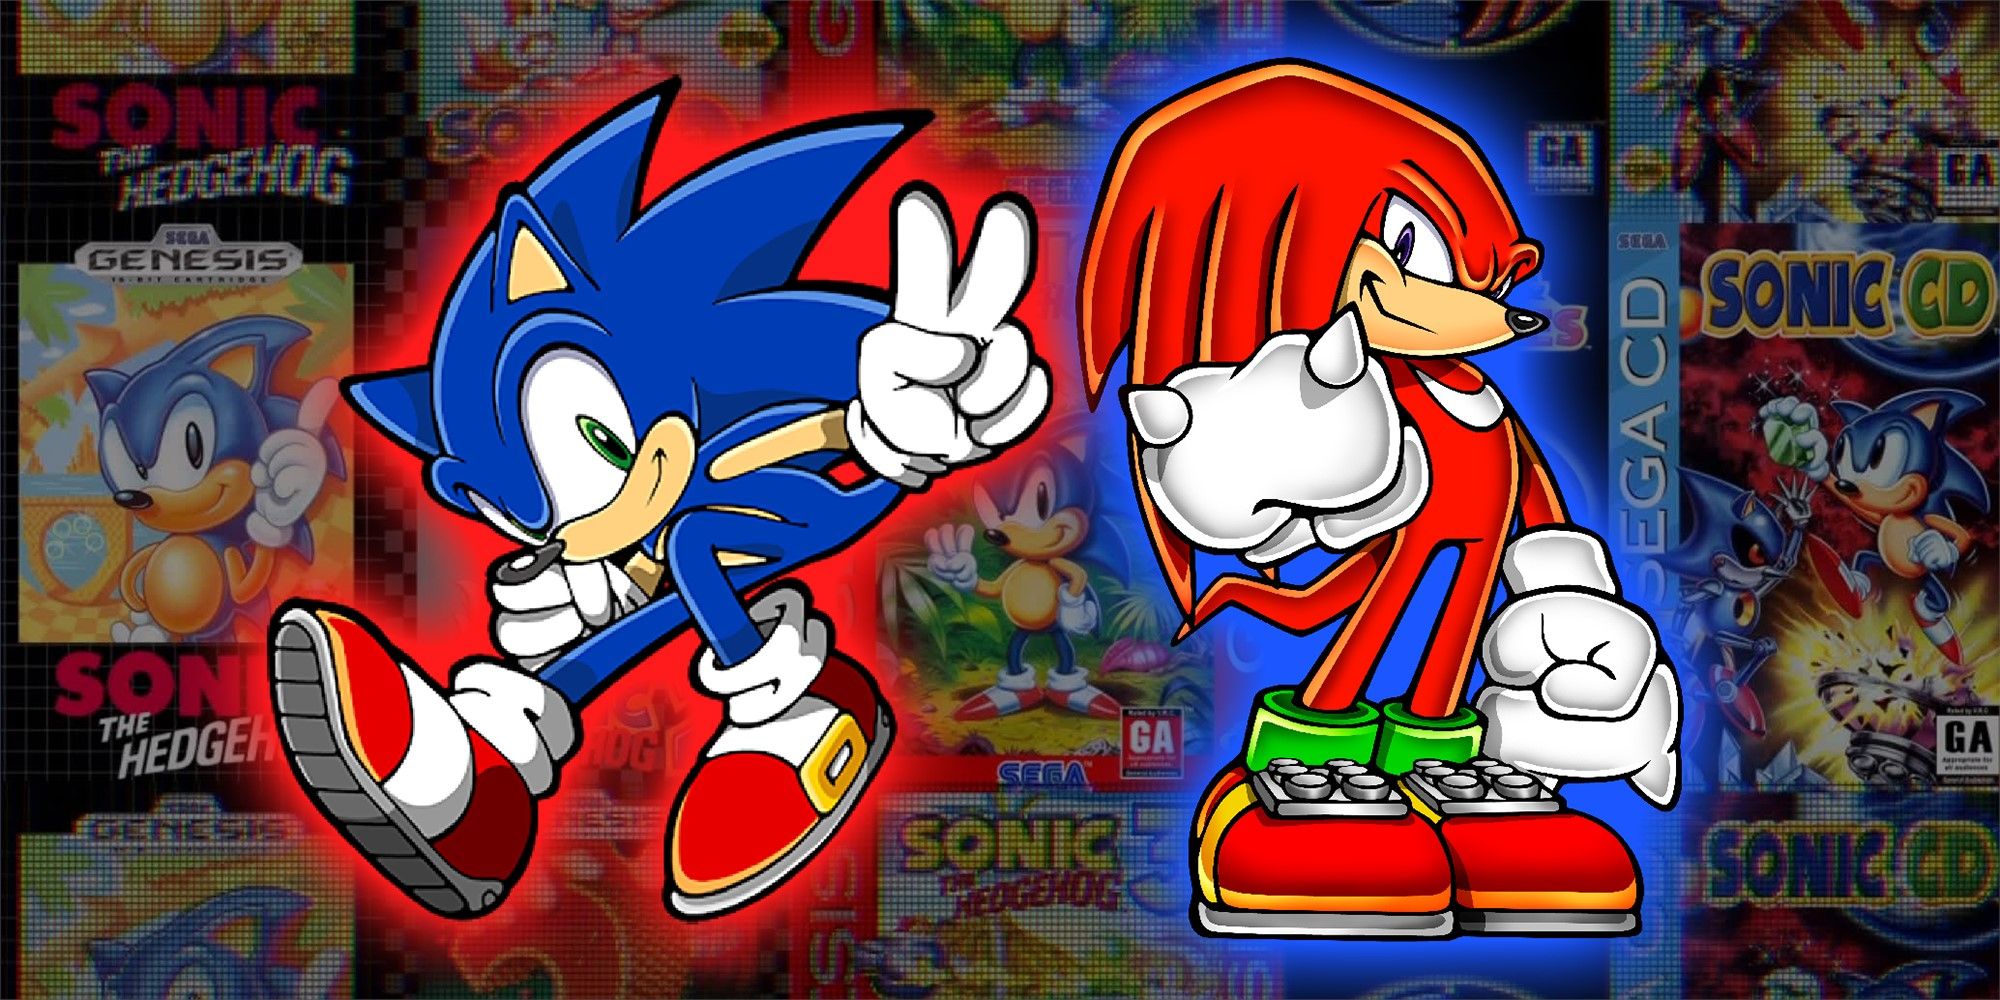 sonic and knuckles cartridge